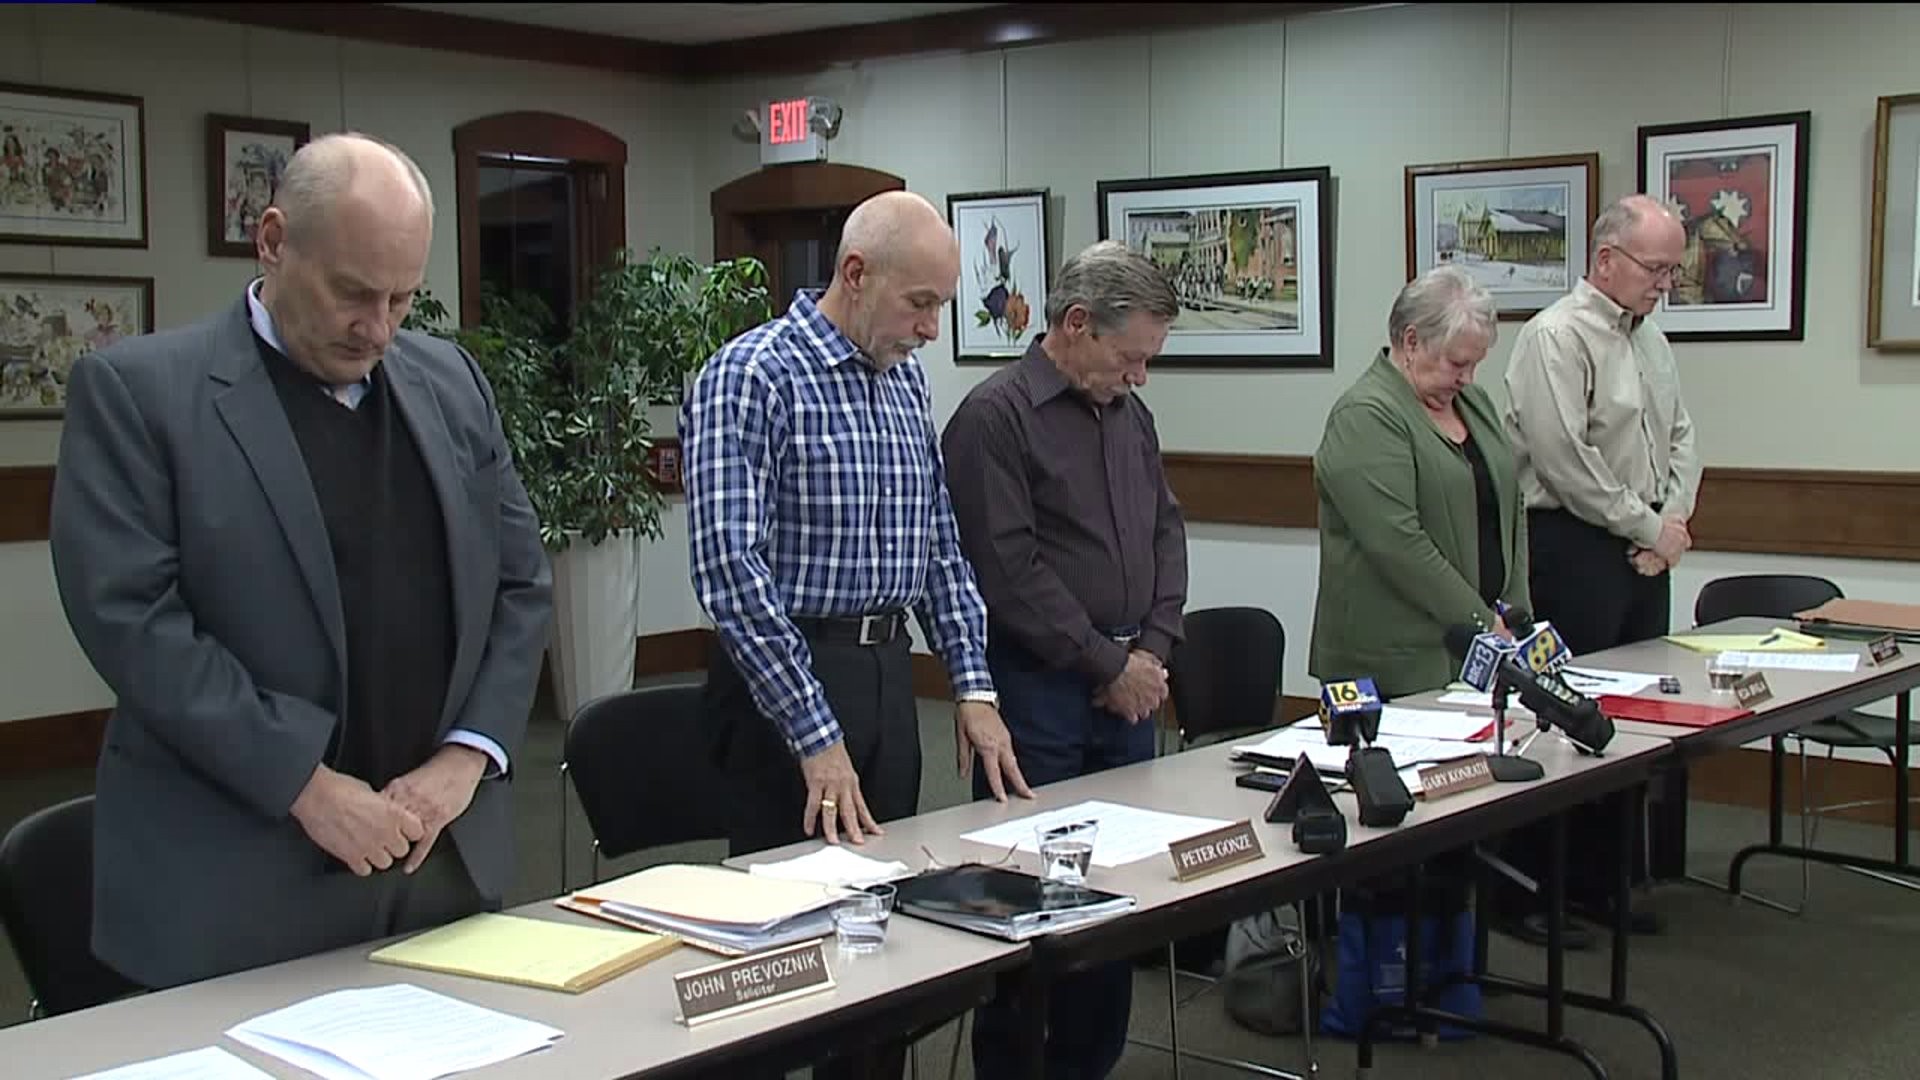 Township Officials Hold First Meeting Following Shooting Death of Employee